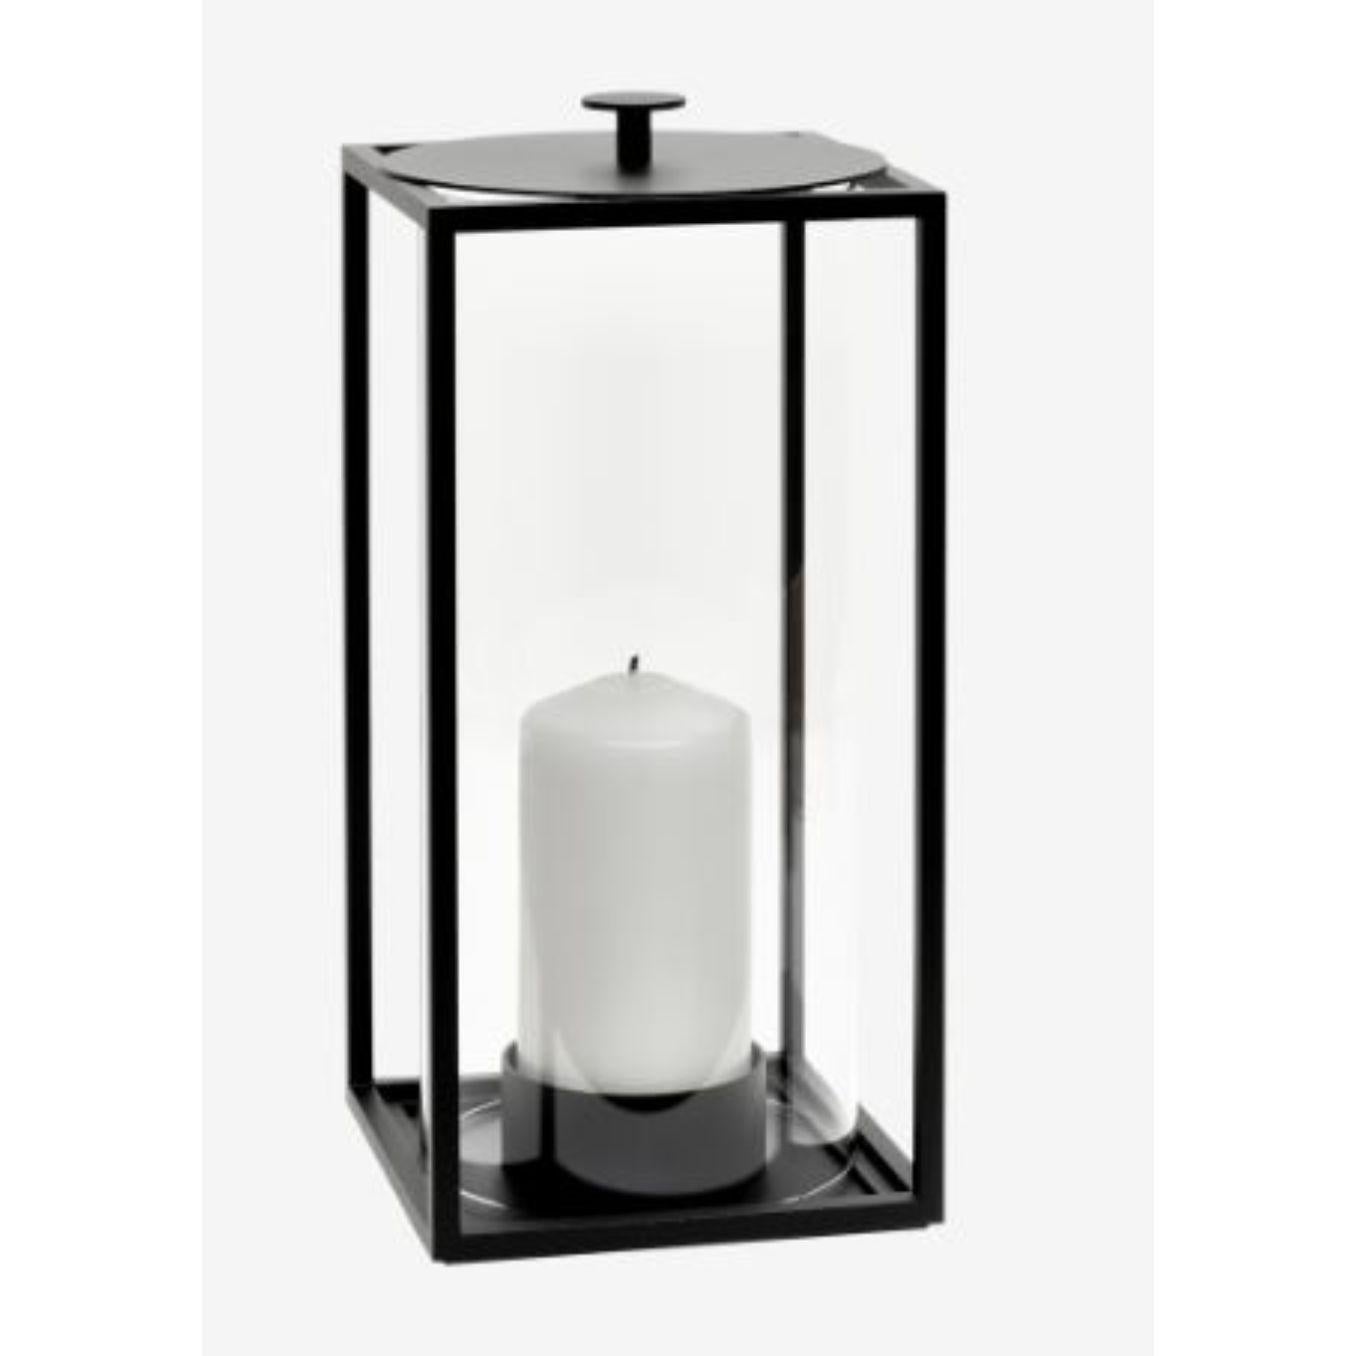 Medium Light’In lantern by Lassen
Dimensions: d 10 x w 12 x h 24 cm 
Materials: Metal 
Also available in different dimensions.
Weight: 1.75 Kg

With a sharp sense of contemporary Functionalist style, Mogens Lassen designed the iconic Kubus